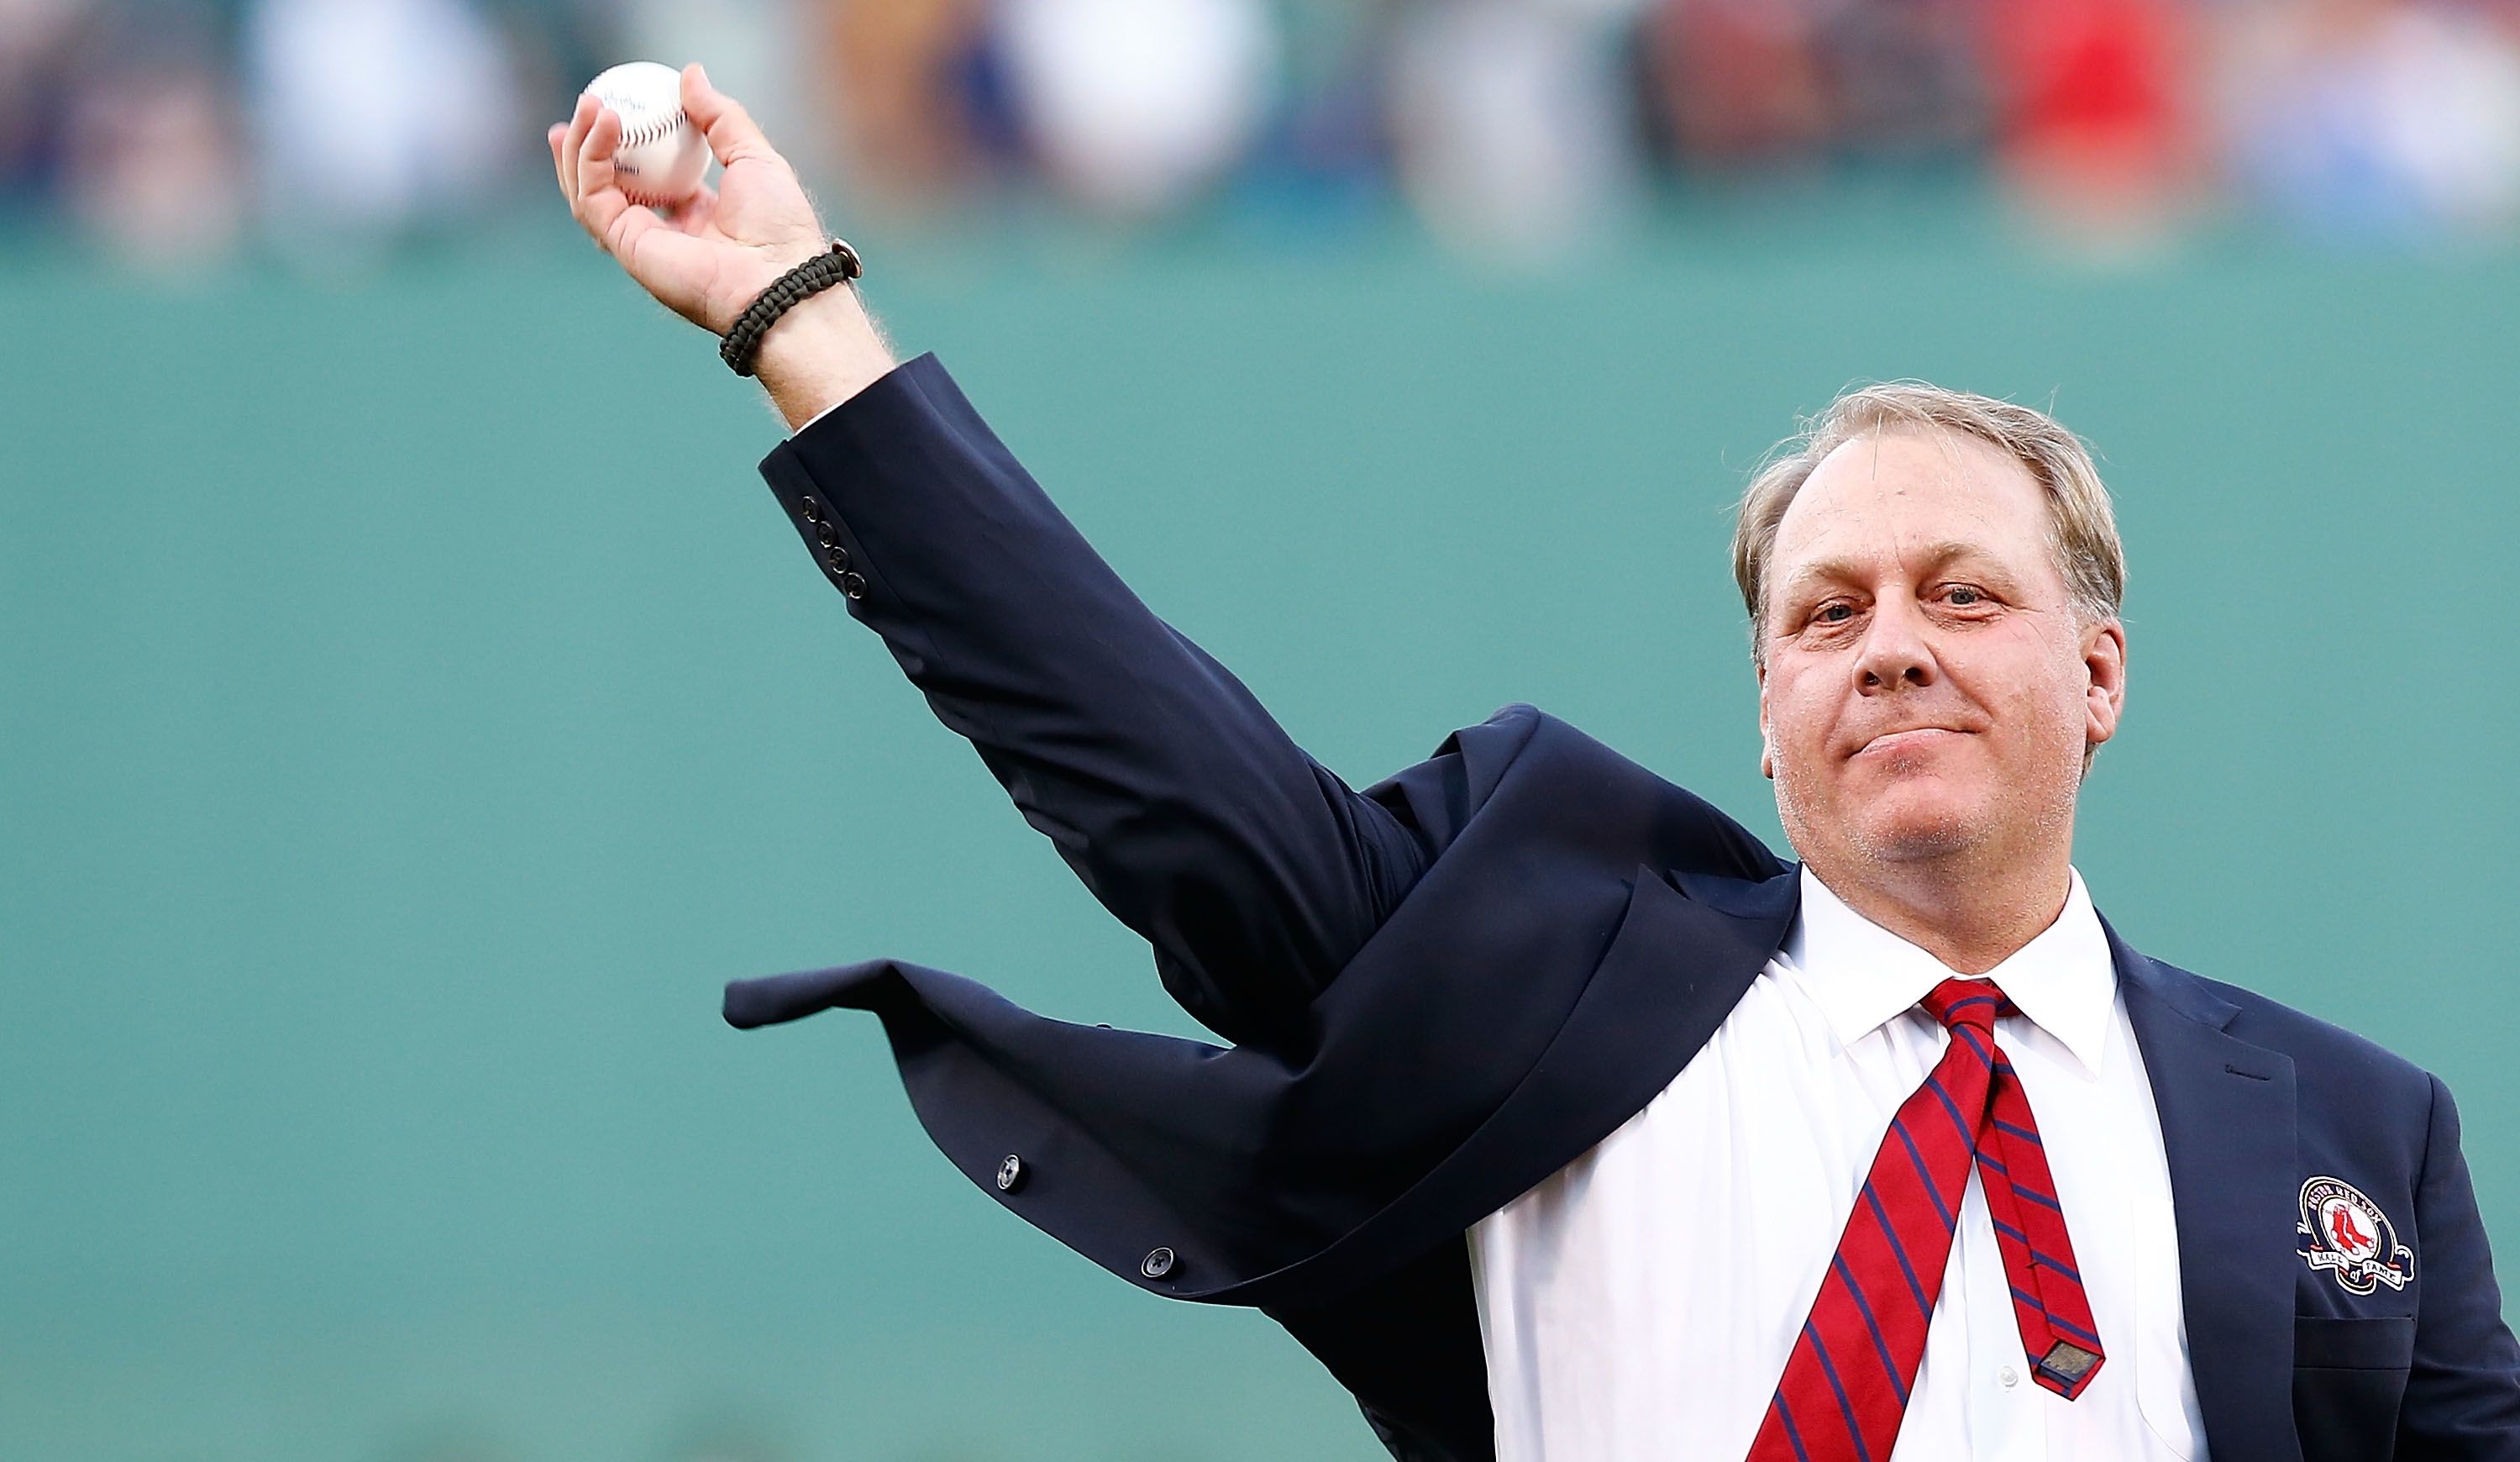 Curt Schilling: He missed out on the Hall of Fame again. Is it